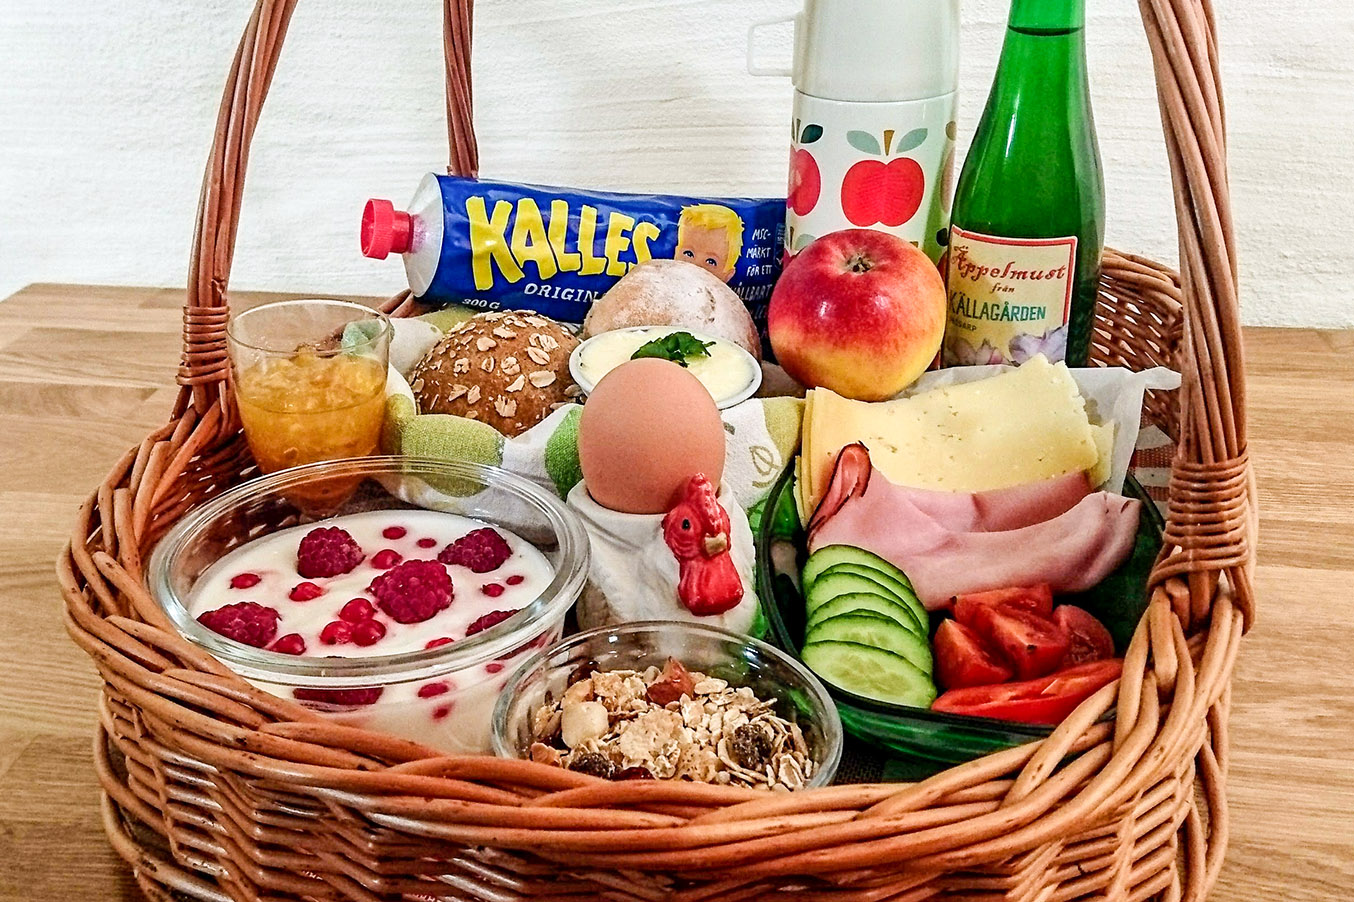 We try to adapt the breakfast basket as much as possible to your individual preferences, based on what we have to offer.